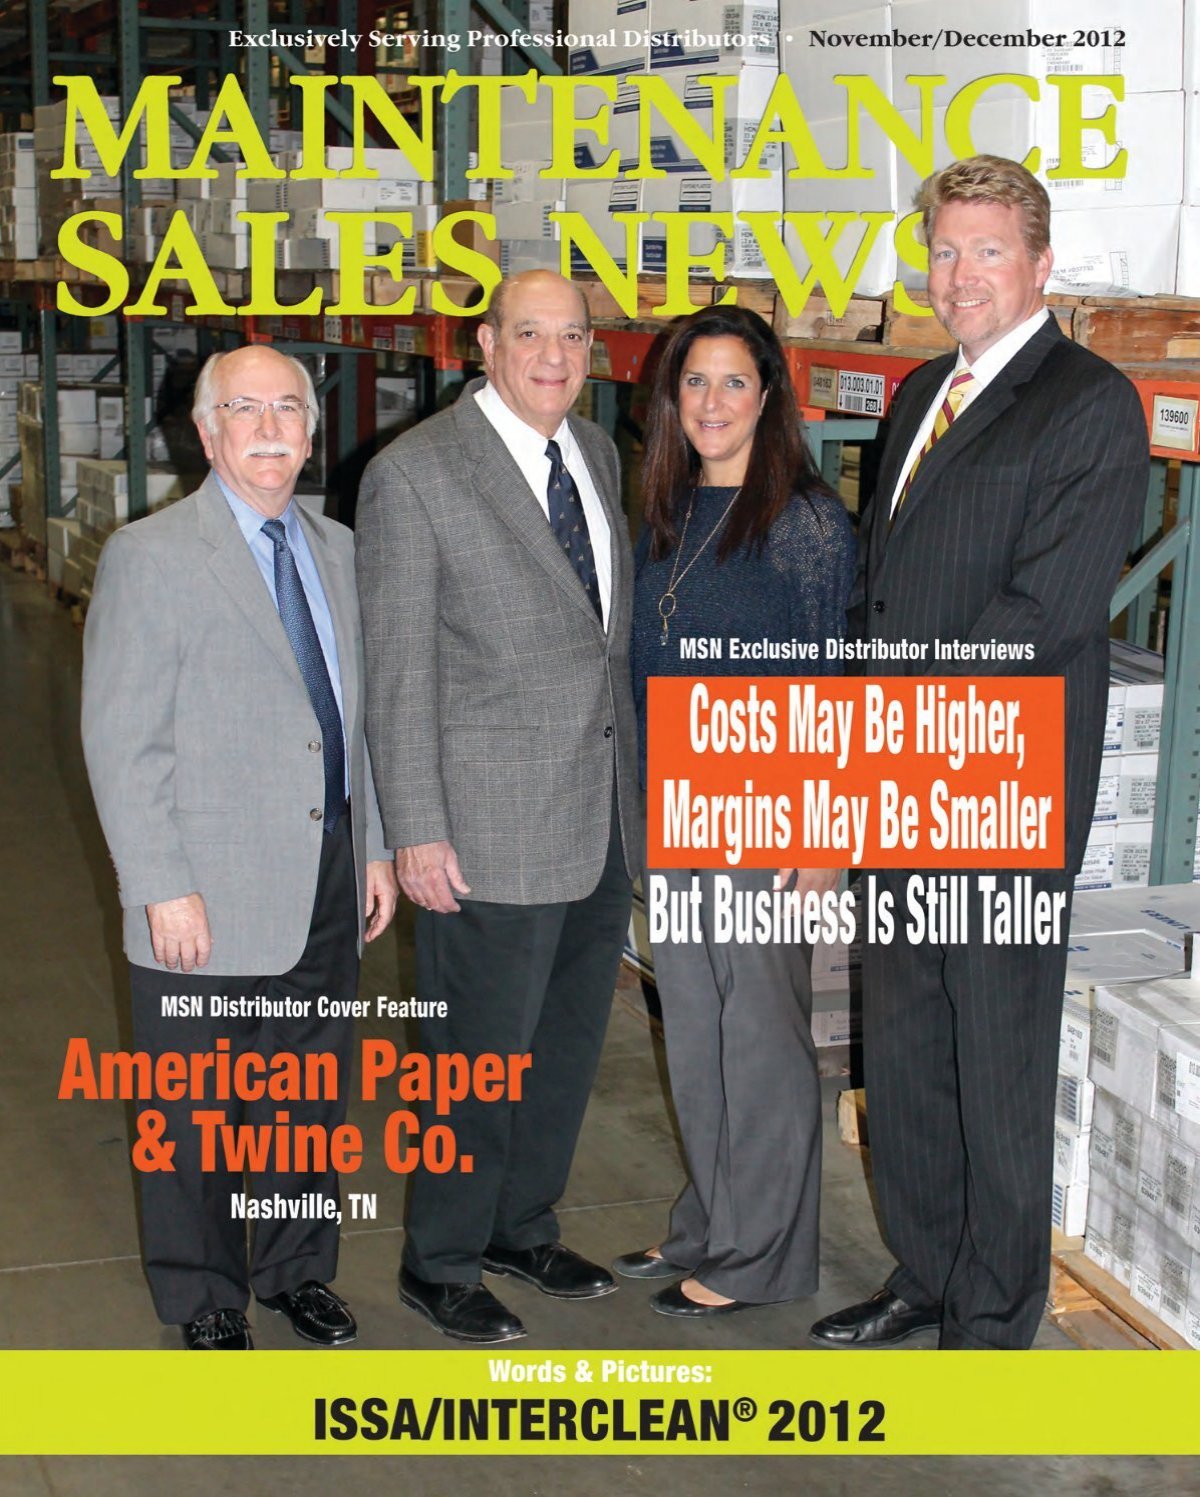 click here to download .pdf - Maintenance Sales News